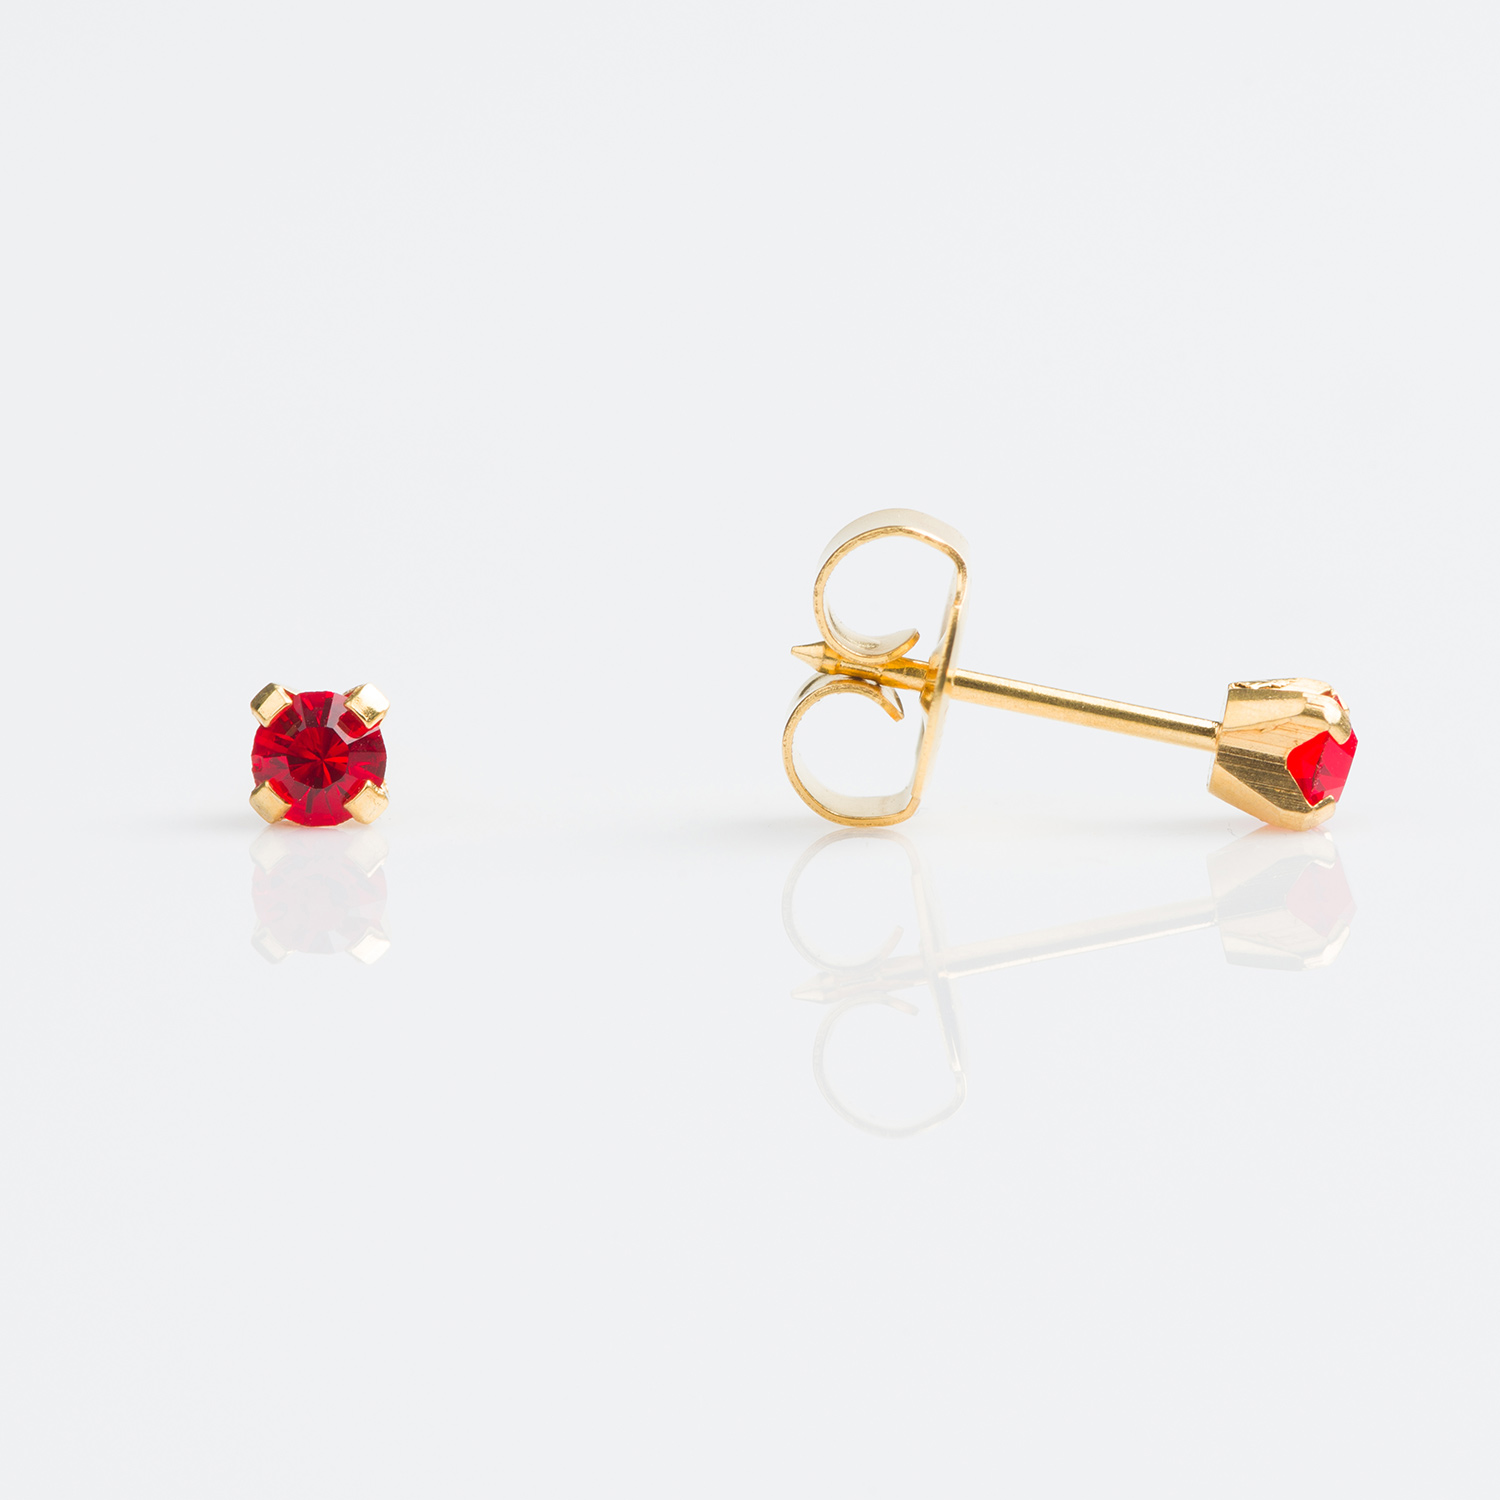 TT-107 – Studex Tiny Tips Gold Plated Tiff. 3mm birthstone gold plated childrens hypoallergenic July Ruby Stud Earrings